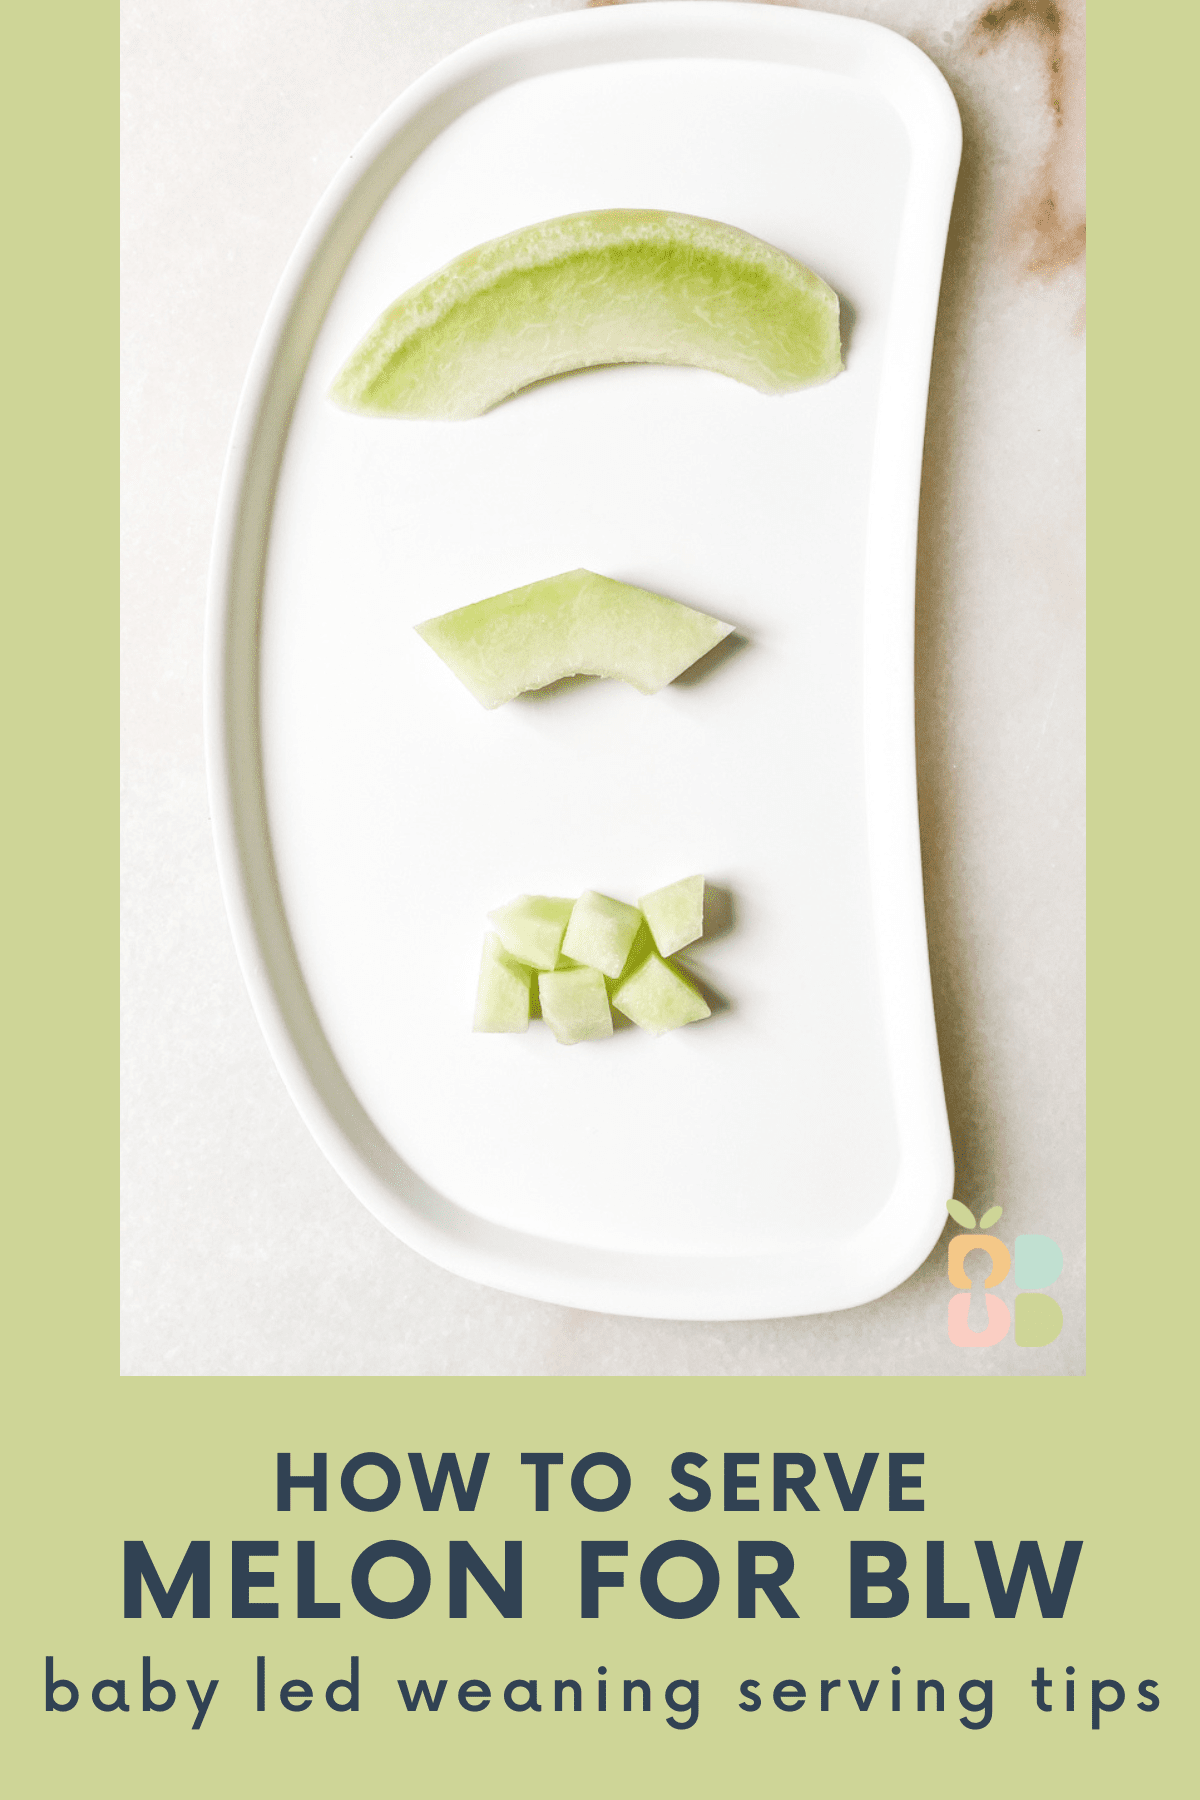 three ways of serving honeydew melon on a white baby tray with text overlay.